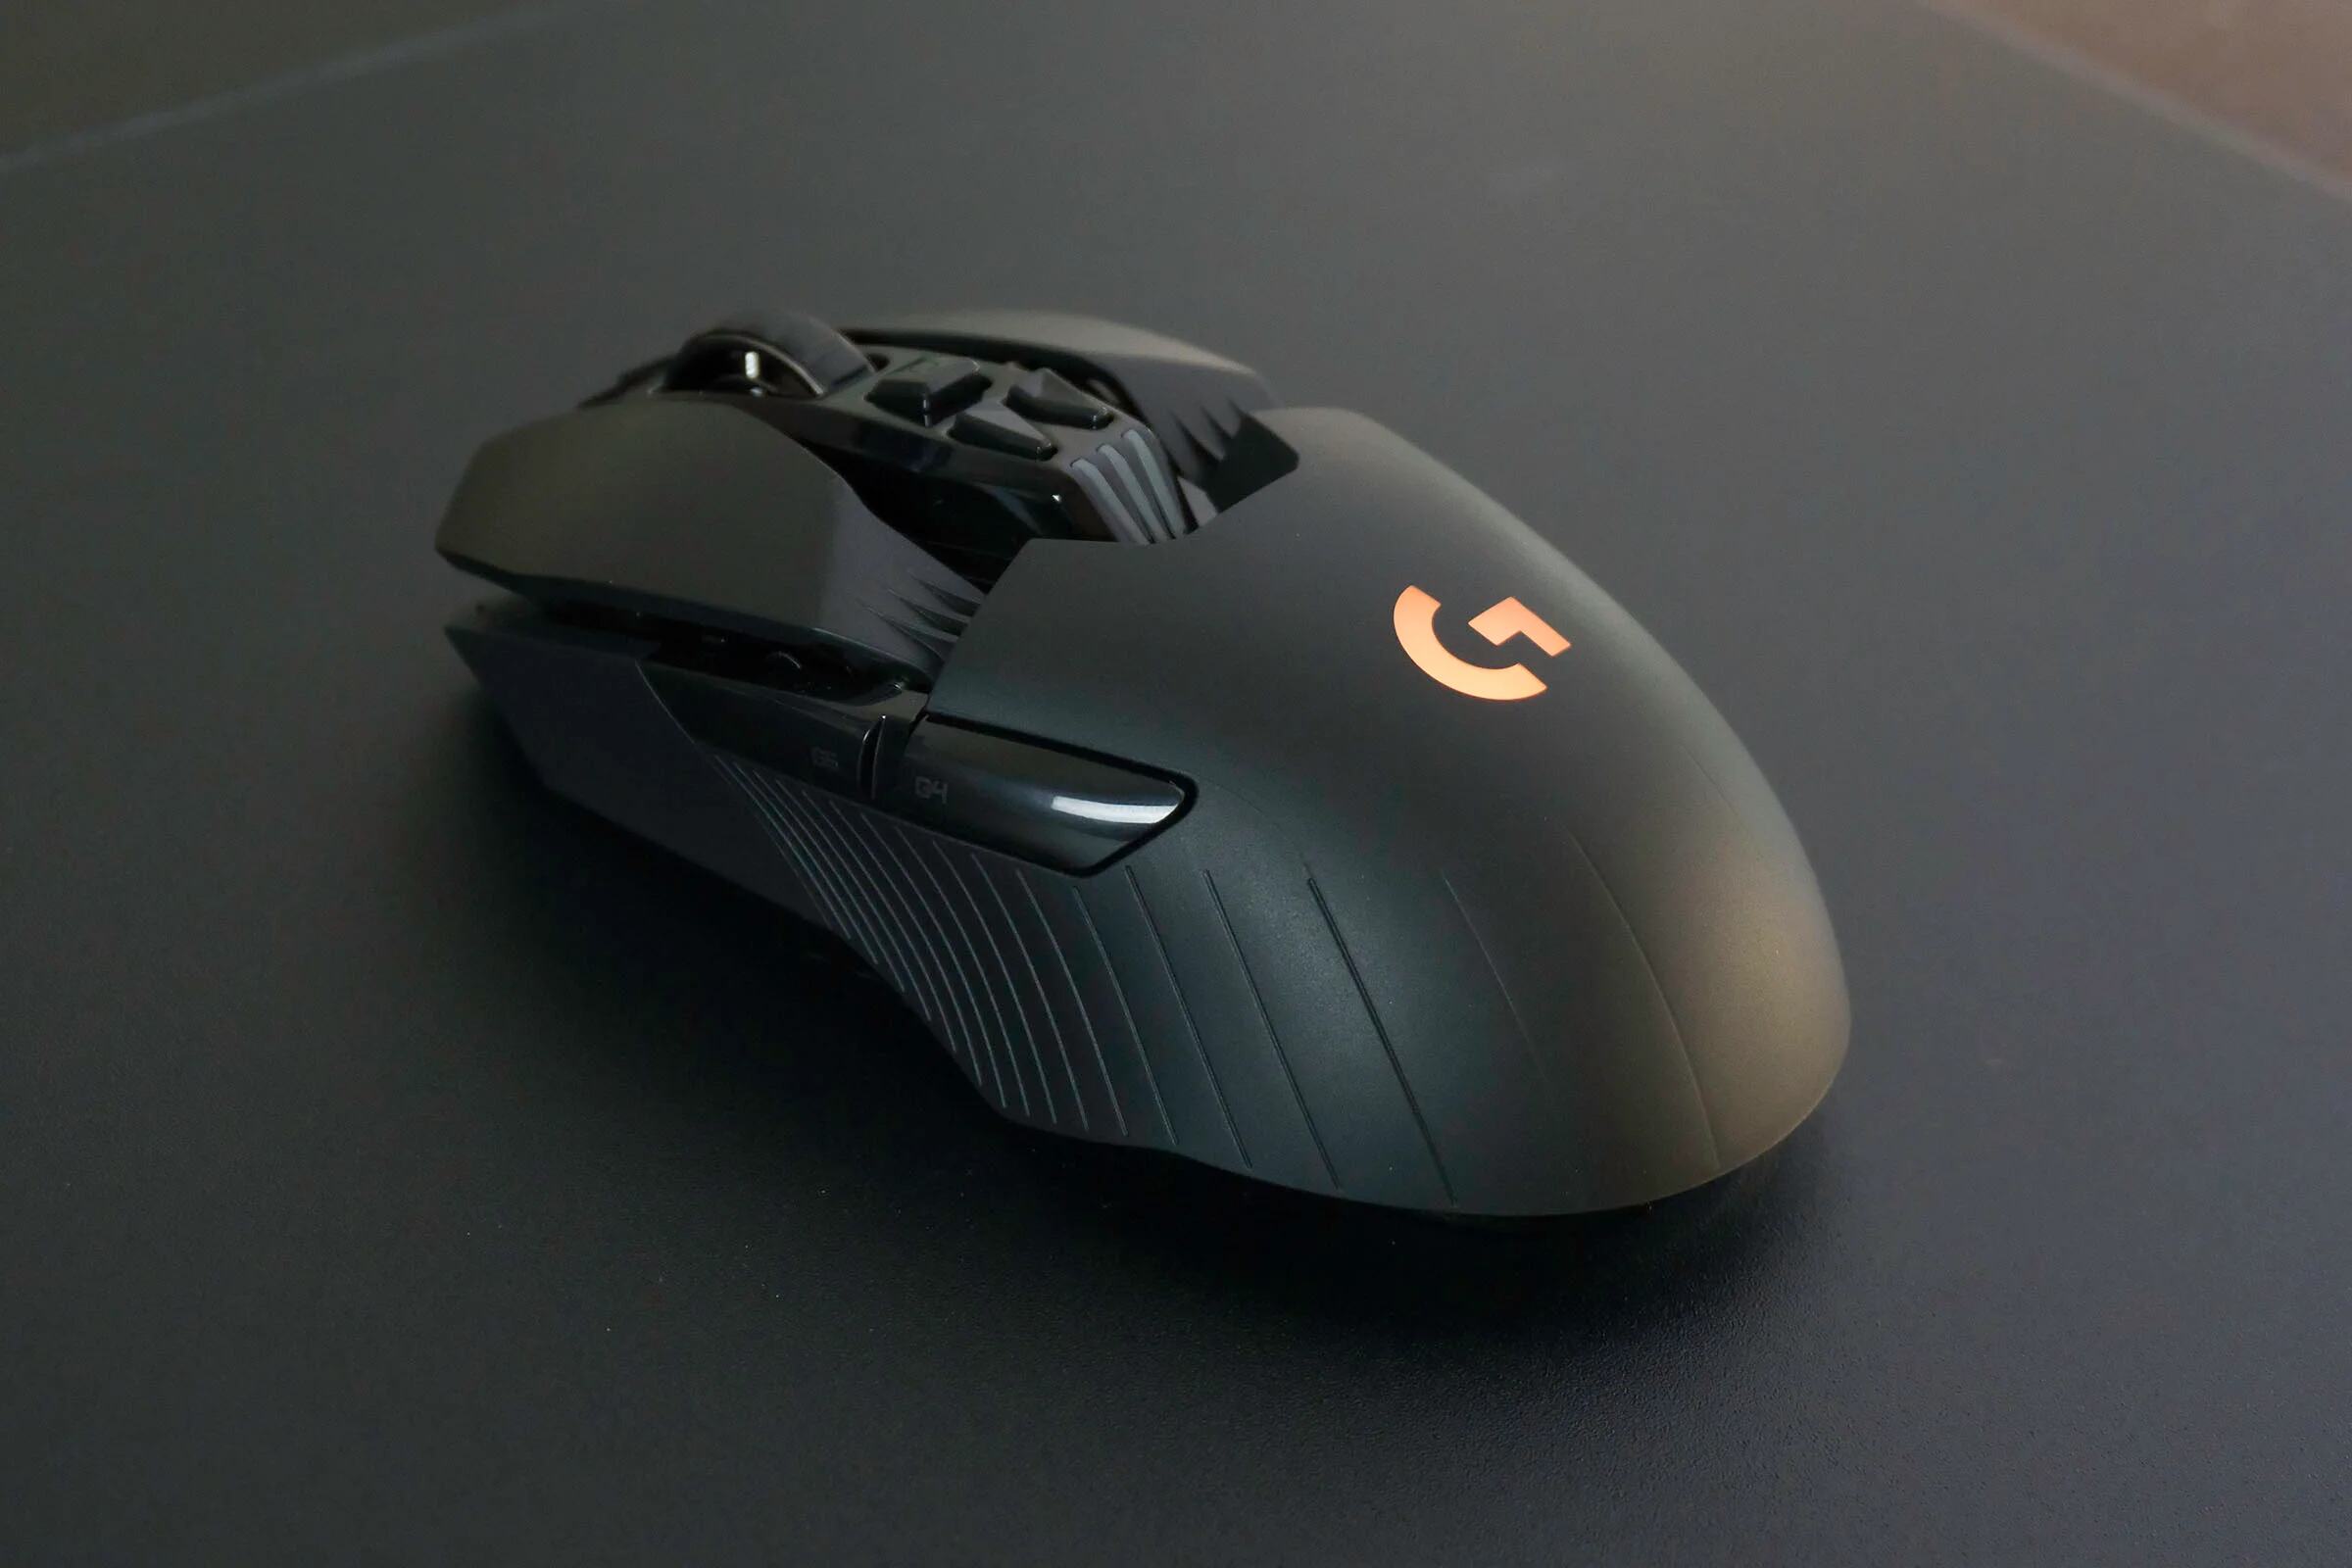 How To Setup The Logitech G903 Gaming Mouse